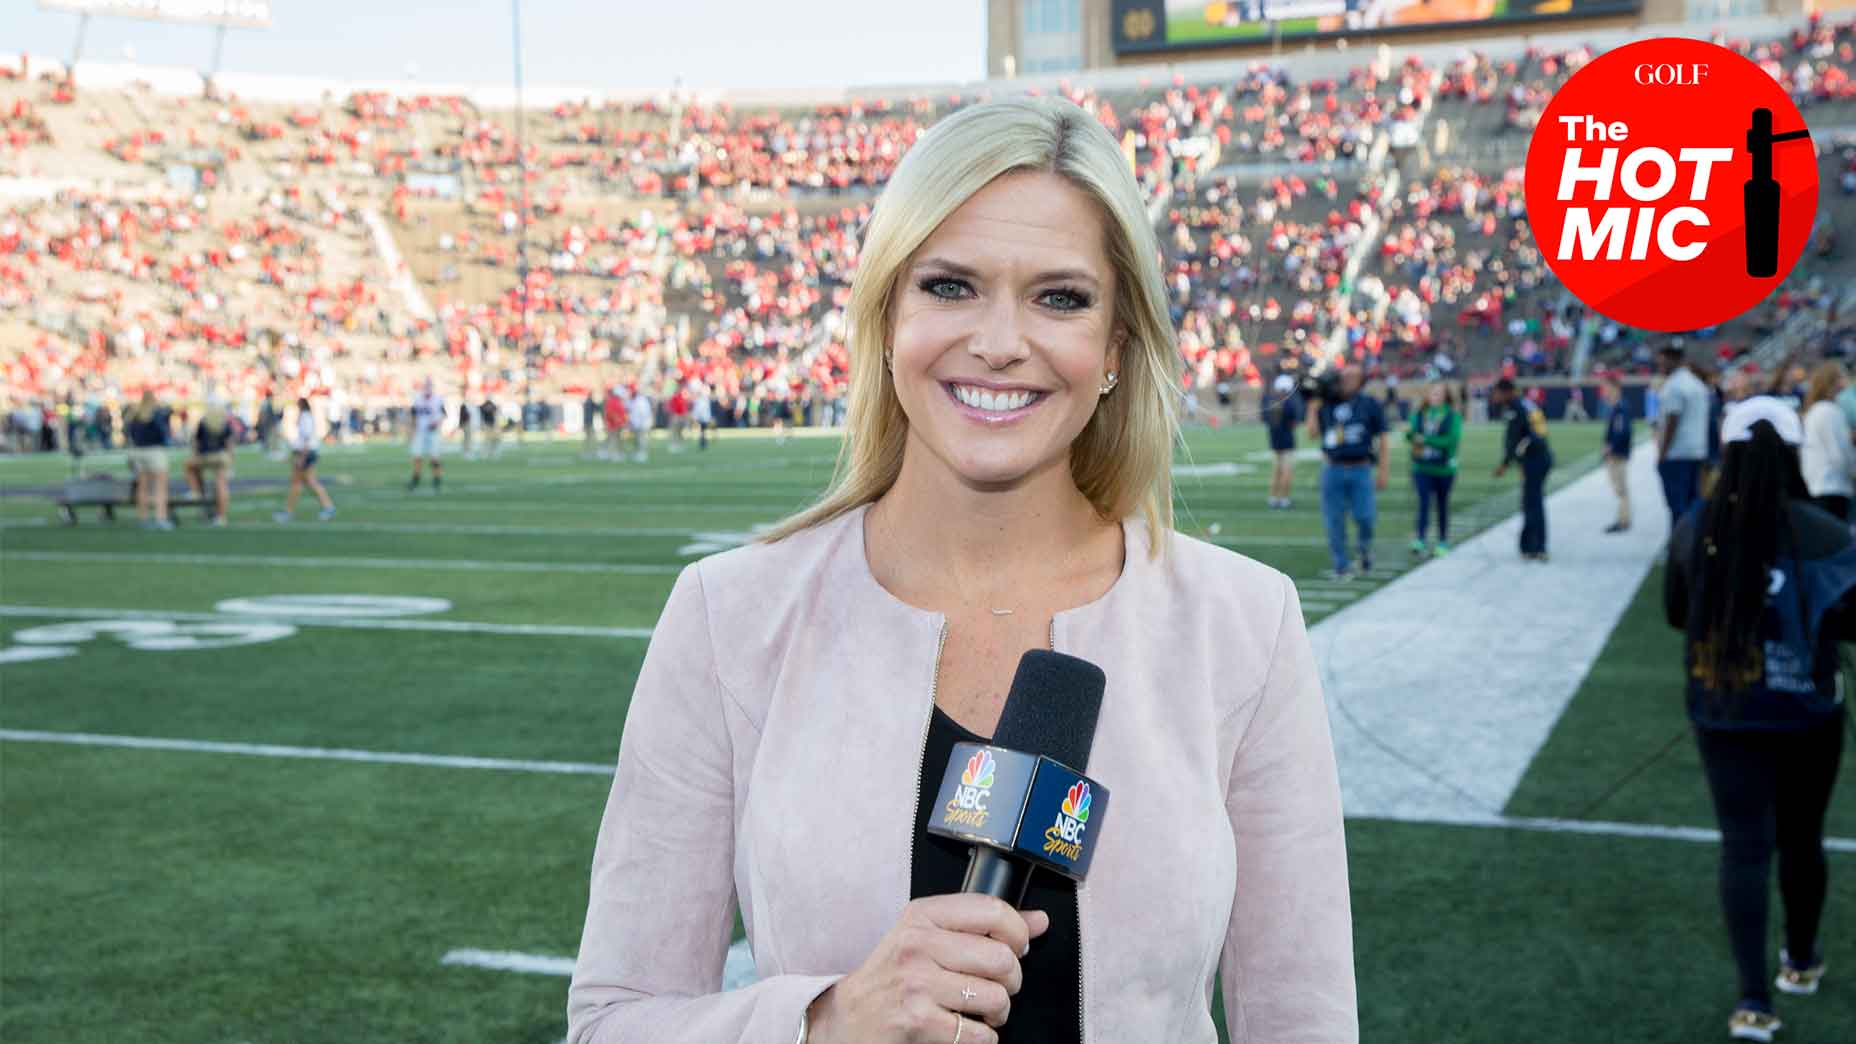 Hot Mic NBC Golf adds Kathryn Tappen as lead interviewer for 2022